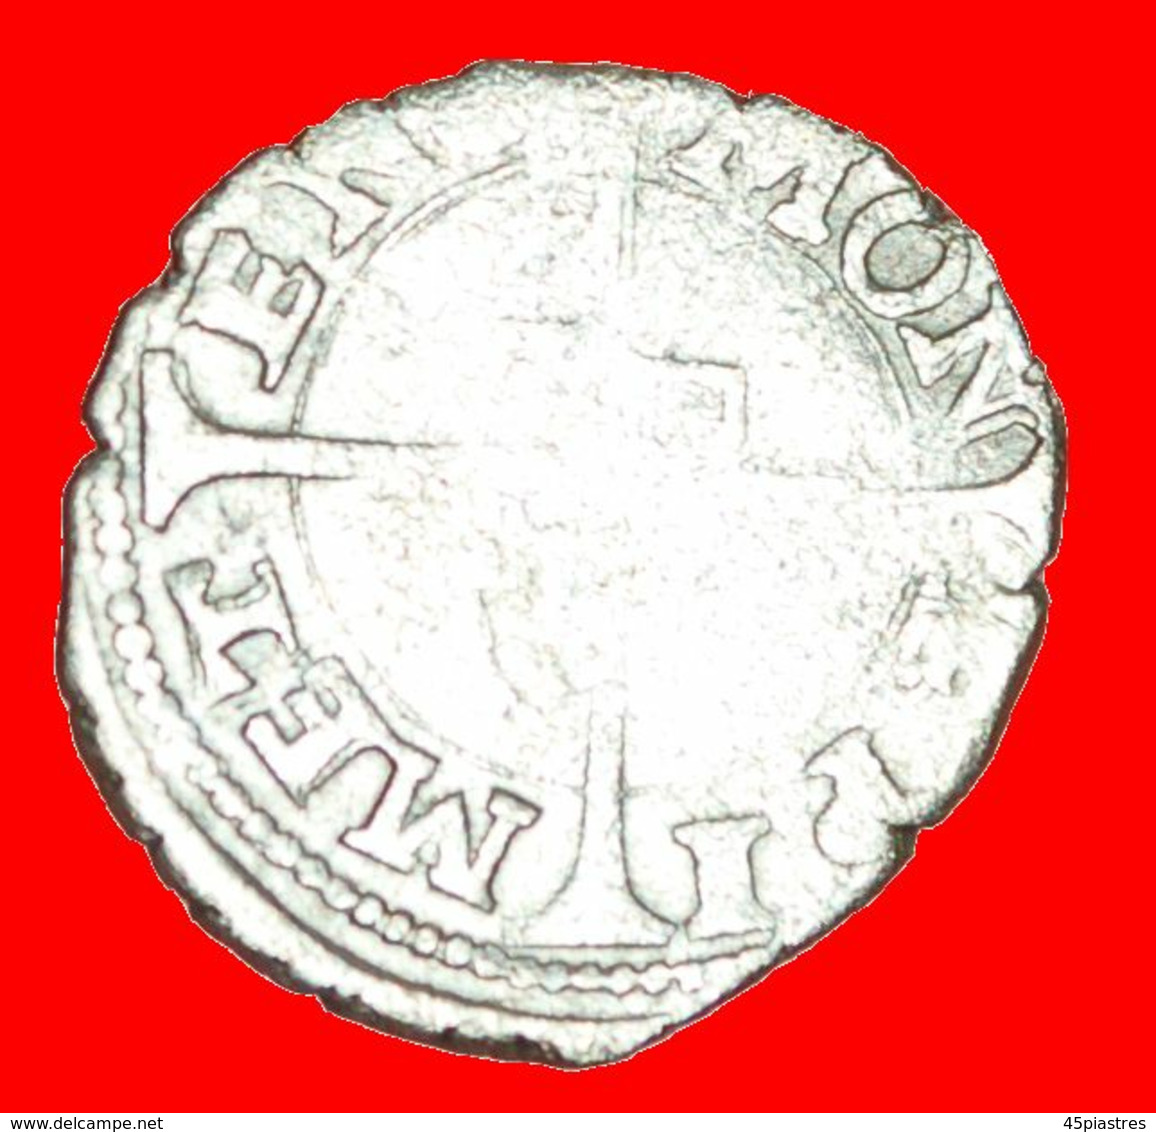 * METZ LORRAINE: FRANCE★BUGNE (1551-1555)! DISCOVERY COIN★ MEDAL ALIGNMENT ↑↑! RECENTLY PUBLISHED★LOW START★ NO RESERVE! - Errors & Oddities